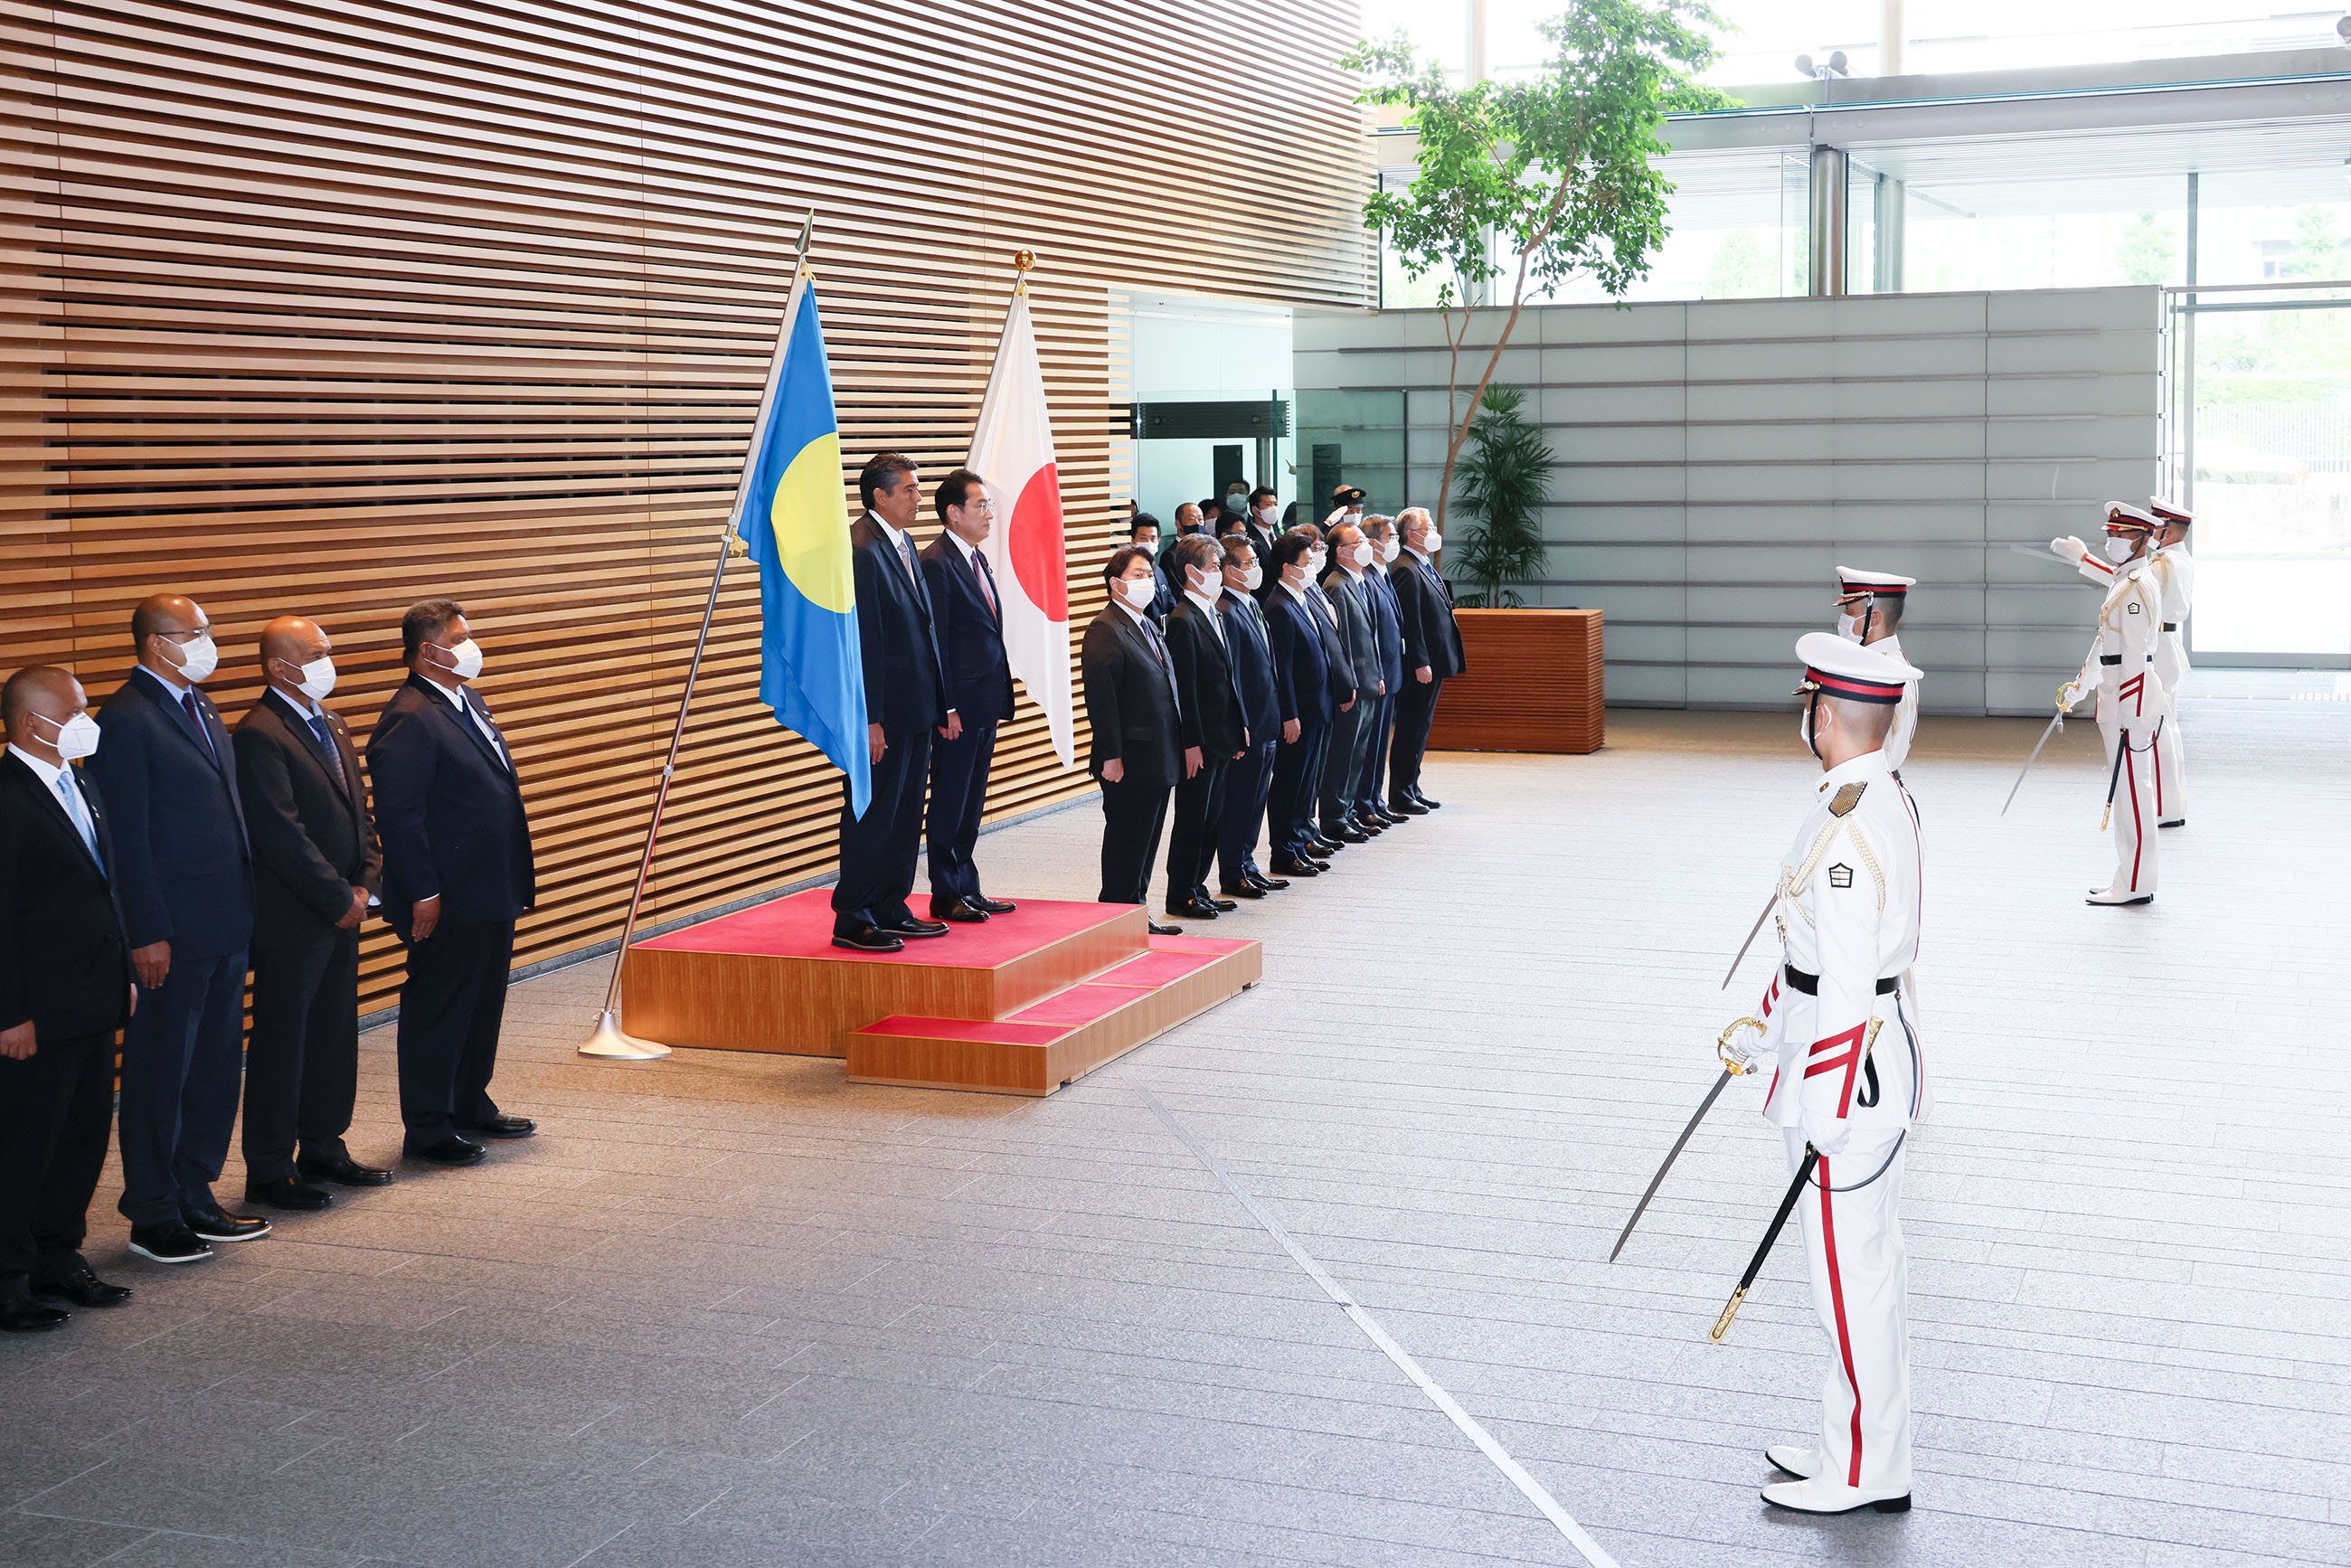 Photograph of a salute and guard of honor ceremony (2)